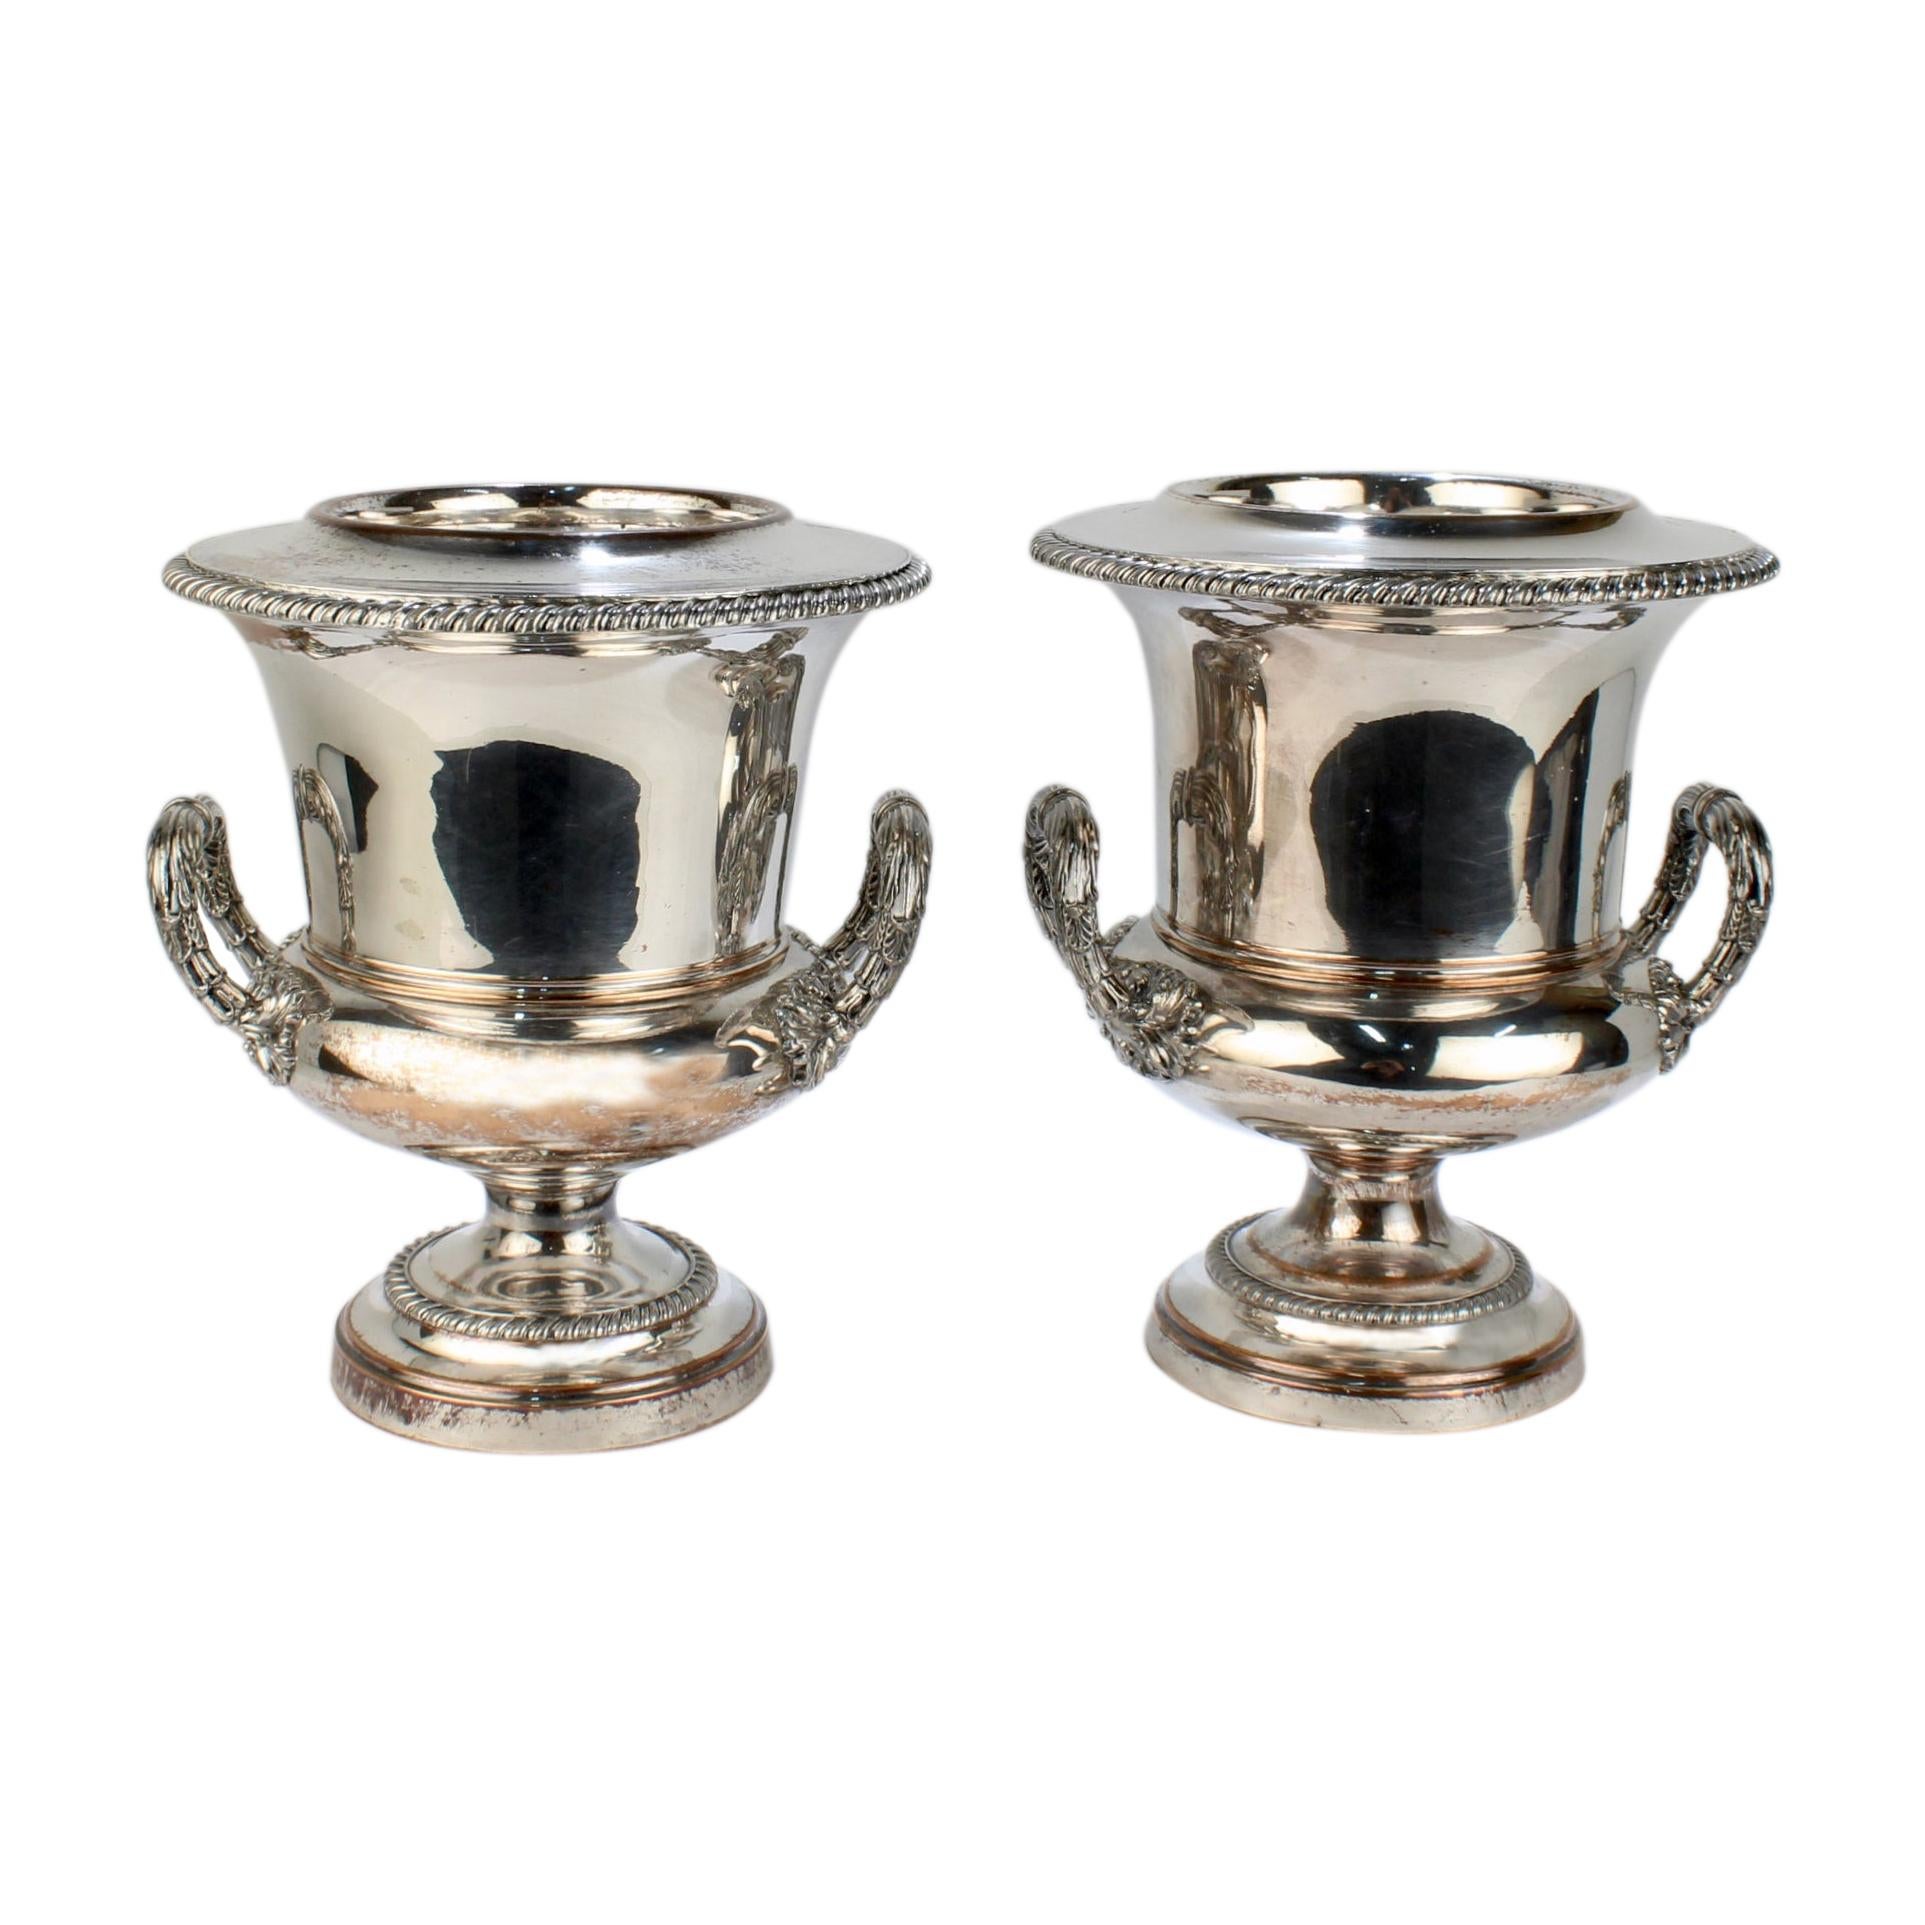 Pair of Antique English Sheffield Silverplate Wine or Champagne Coolers